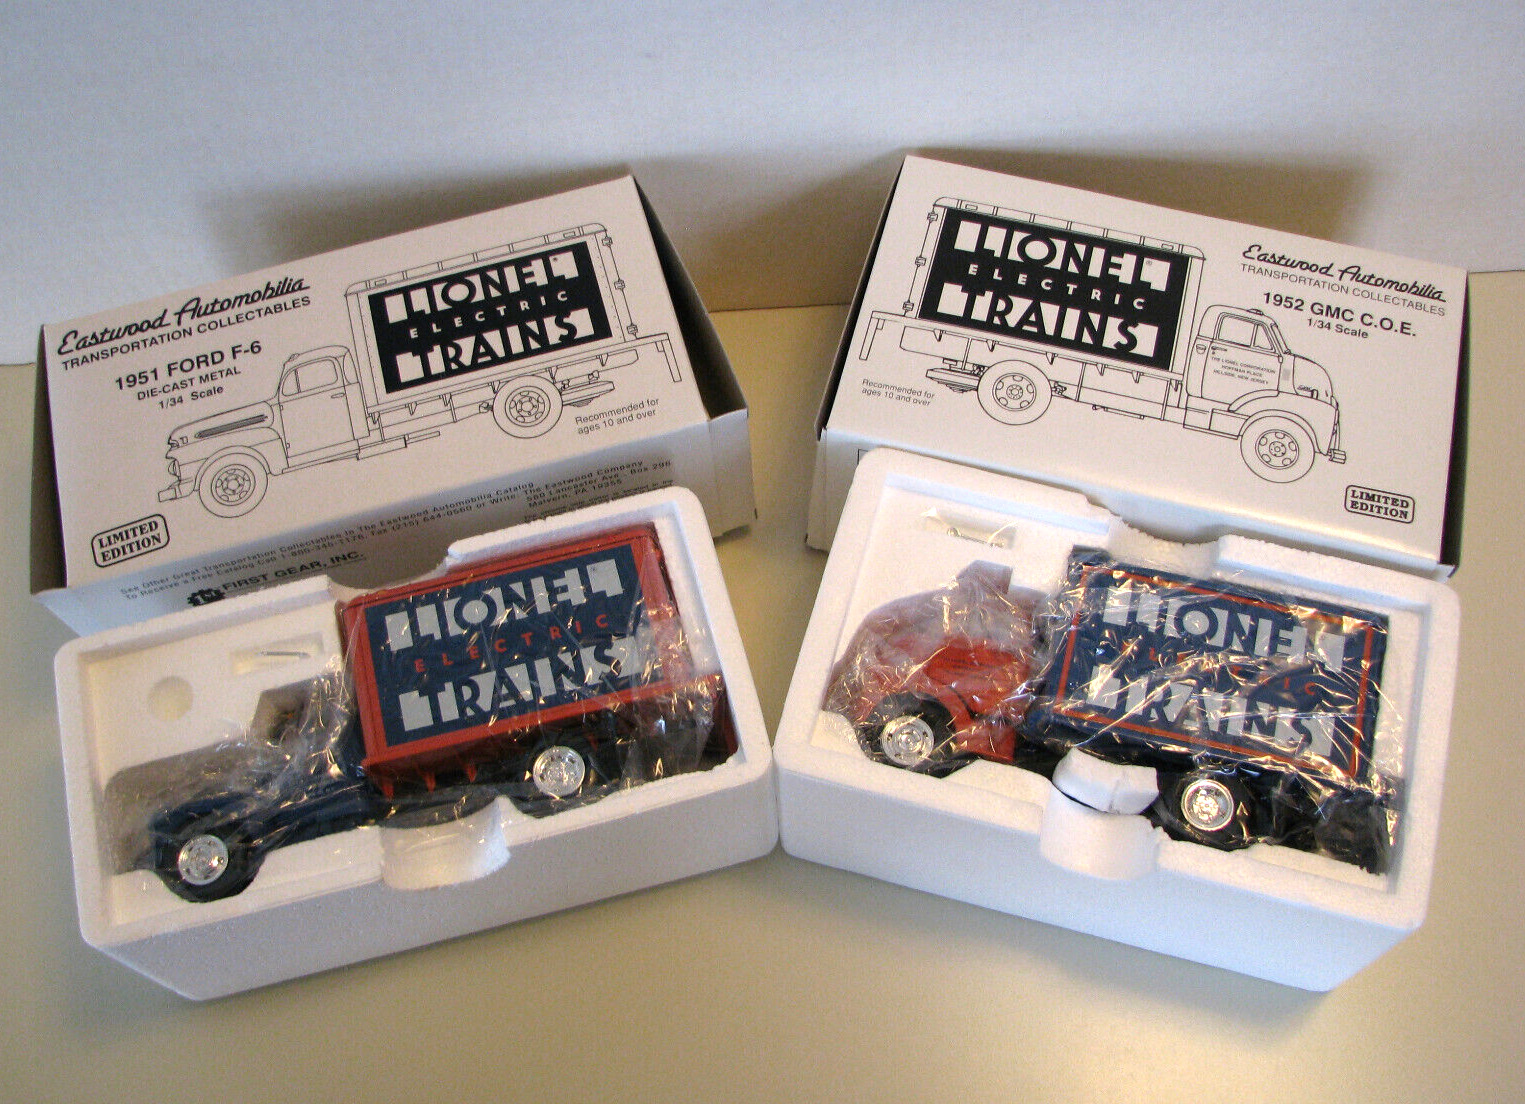 First Gear Eastwood LIONEL TRAINS Delivery Trucks w/ Original Boxes